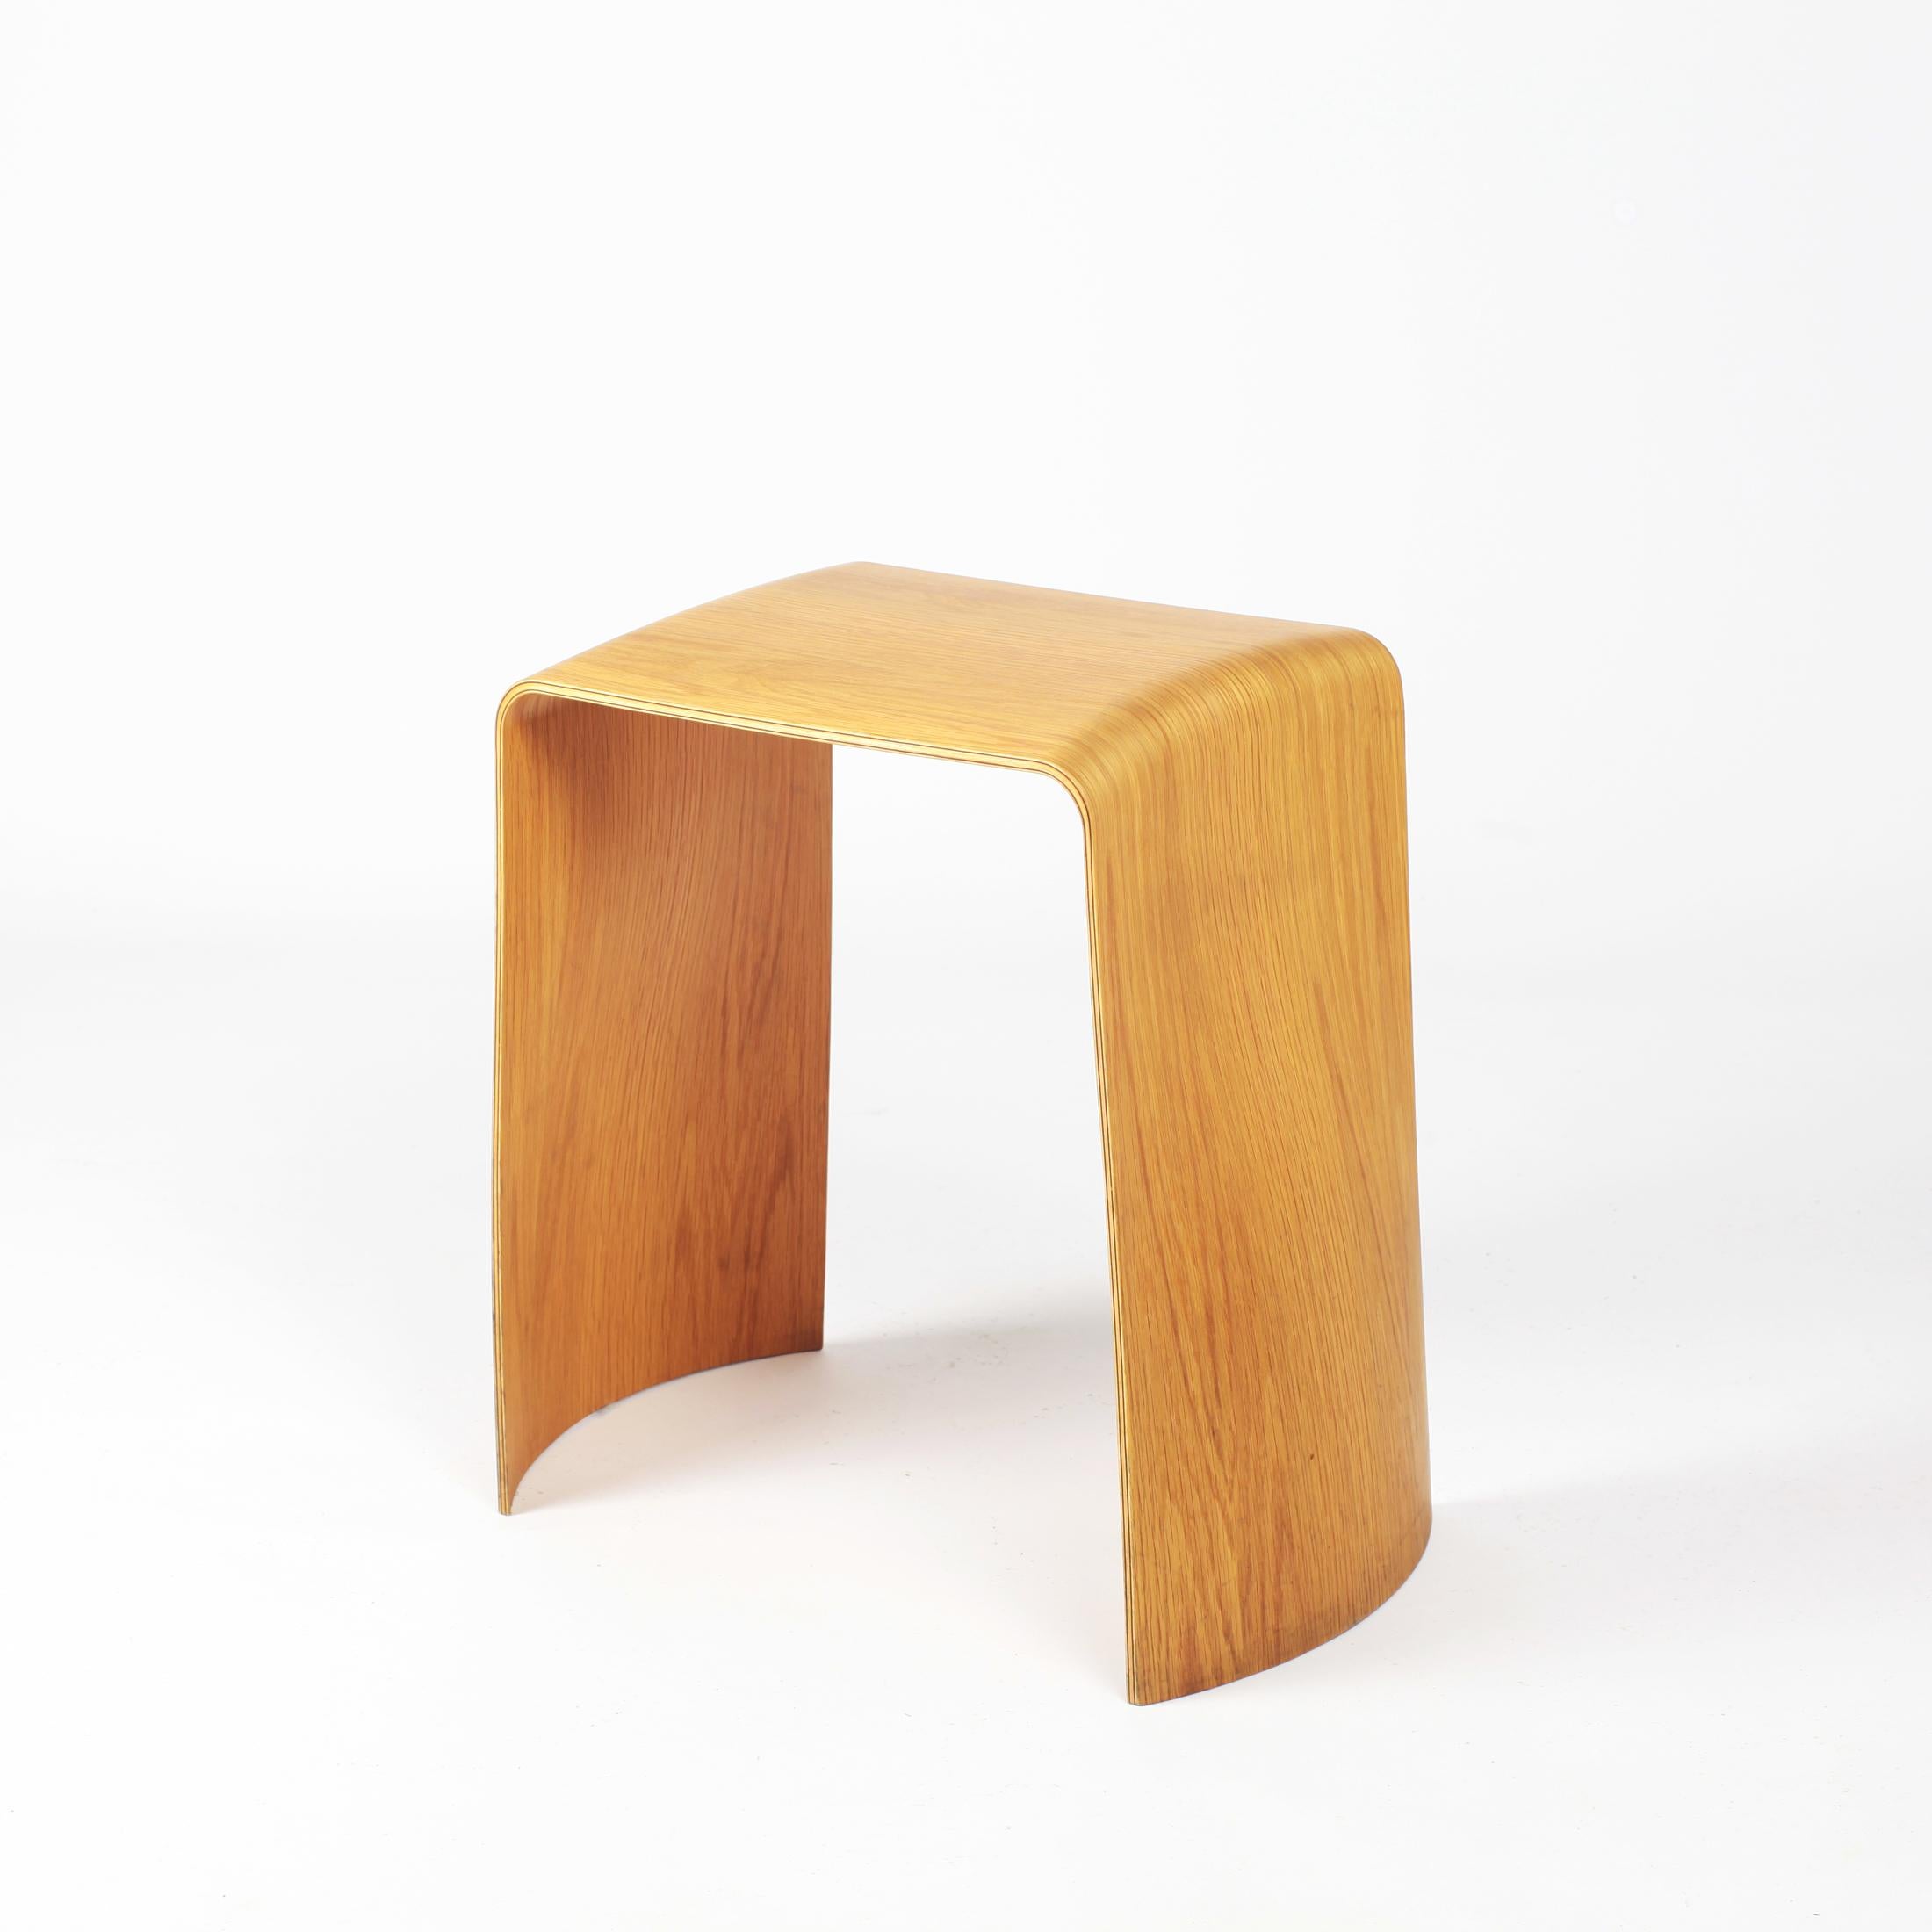 This model Wind stool was designed by Nendo in Japan for the Swedish company Swedese.
It dates from 2004.